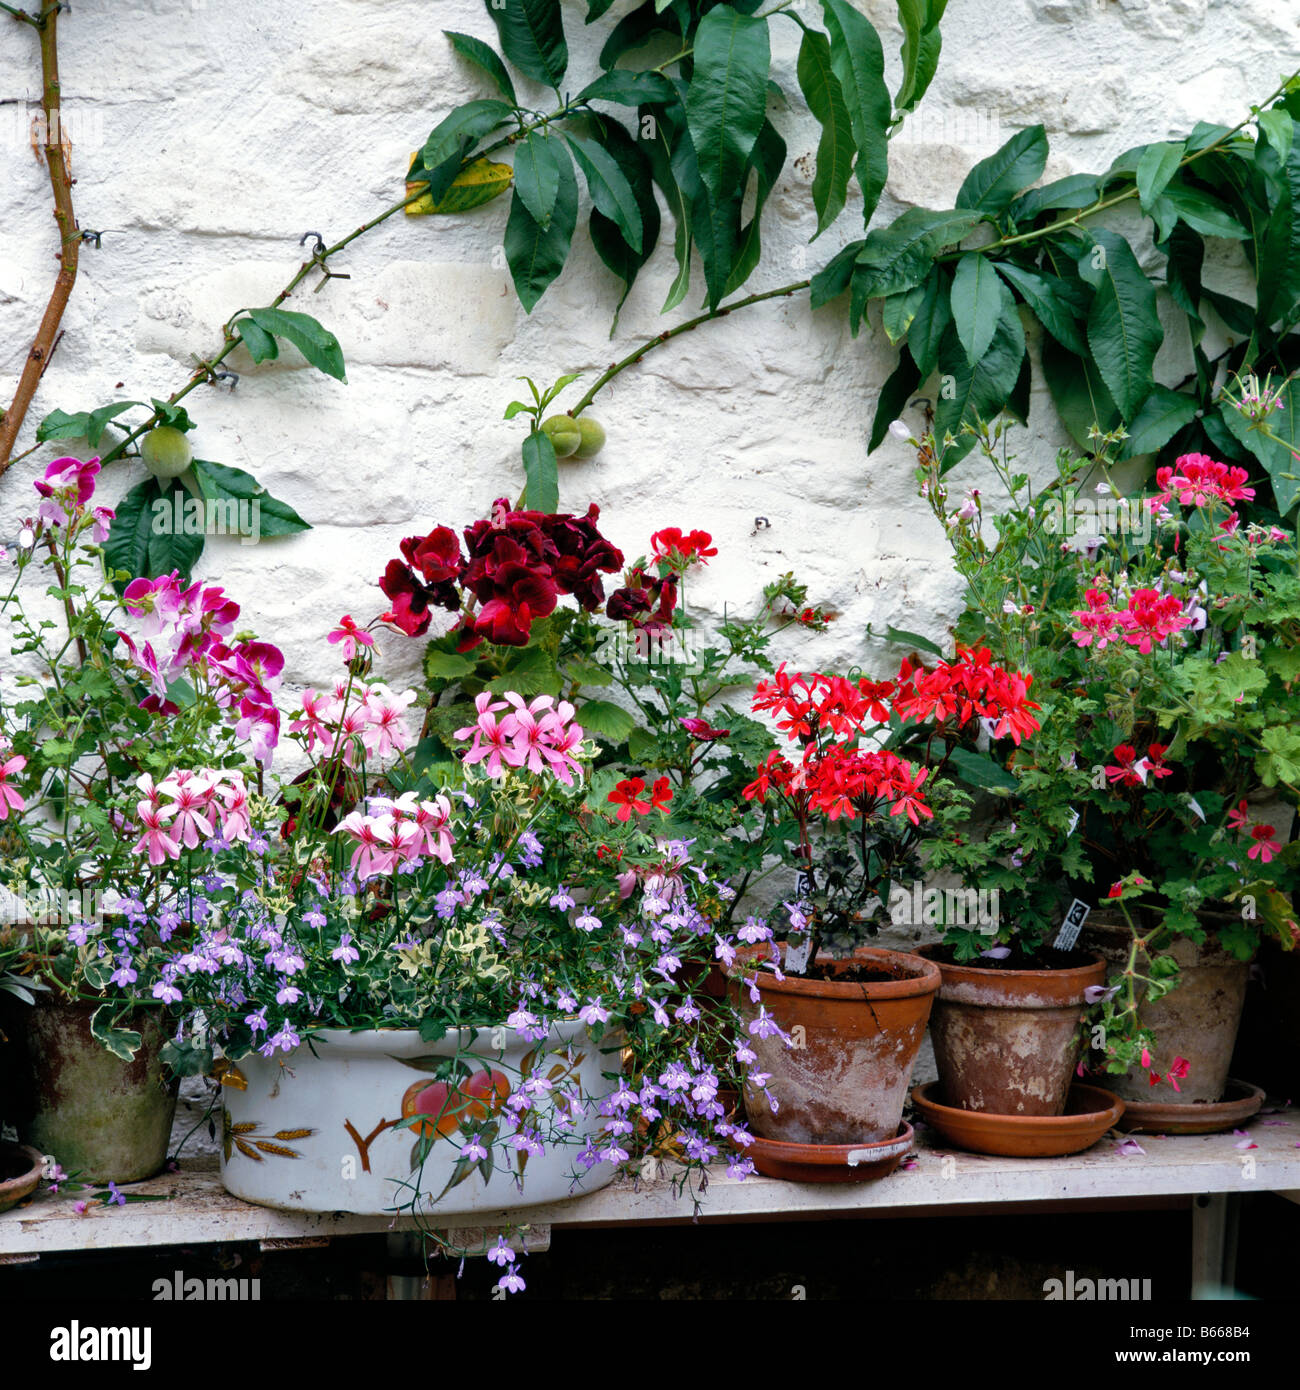 Interior of a greenhouse with colorful geraniums Stock Photo